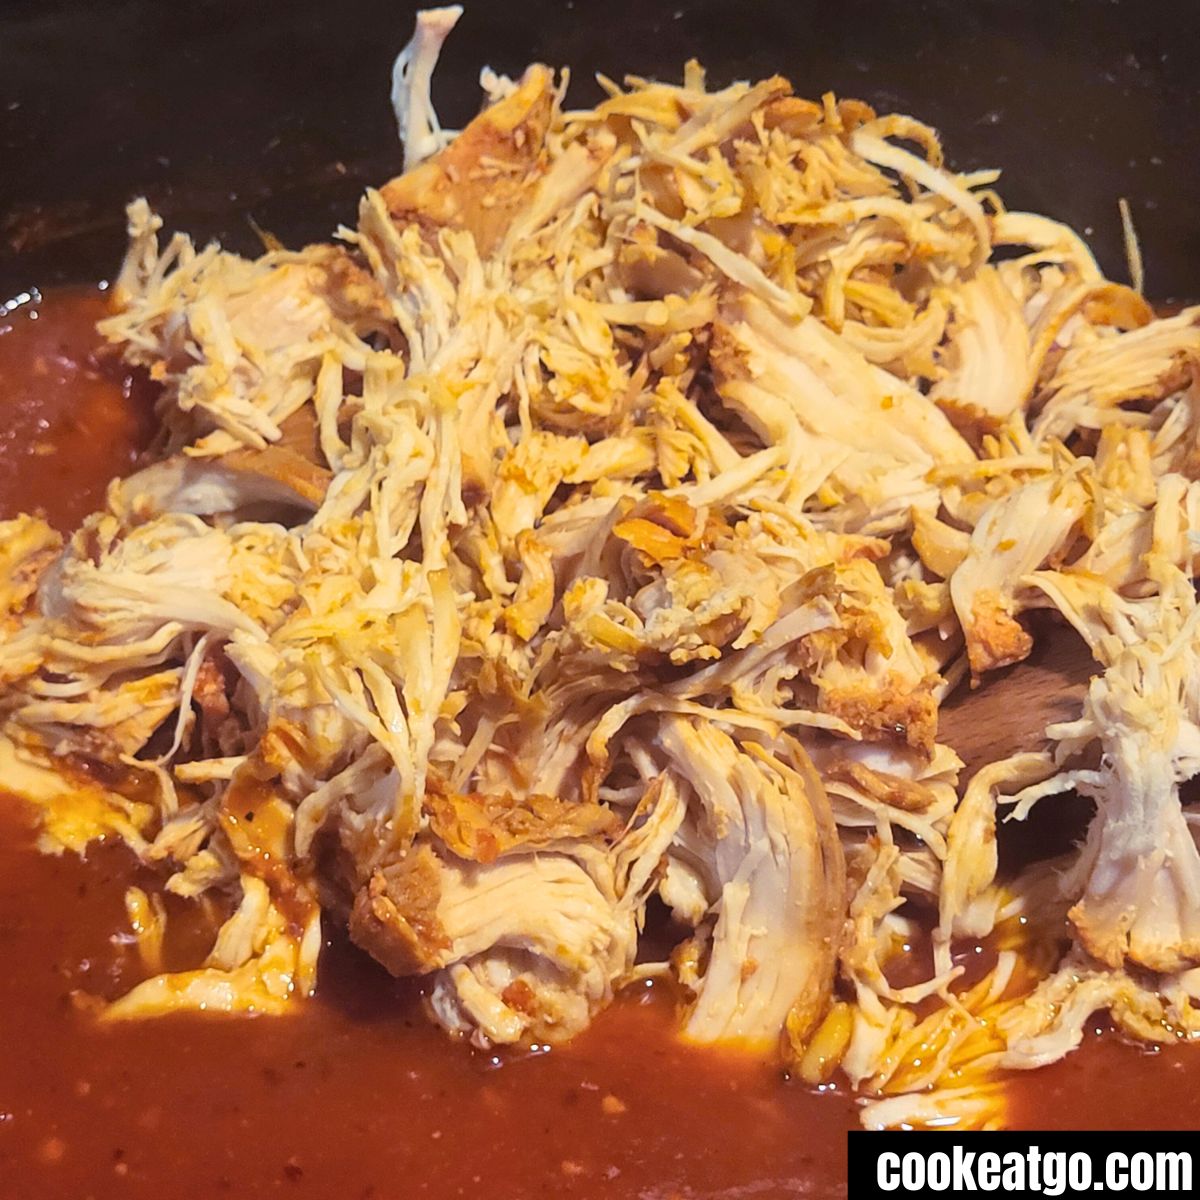 Shredded Chicken breasts in slow cooker chicken parmesan soup